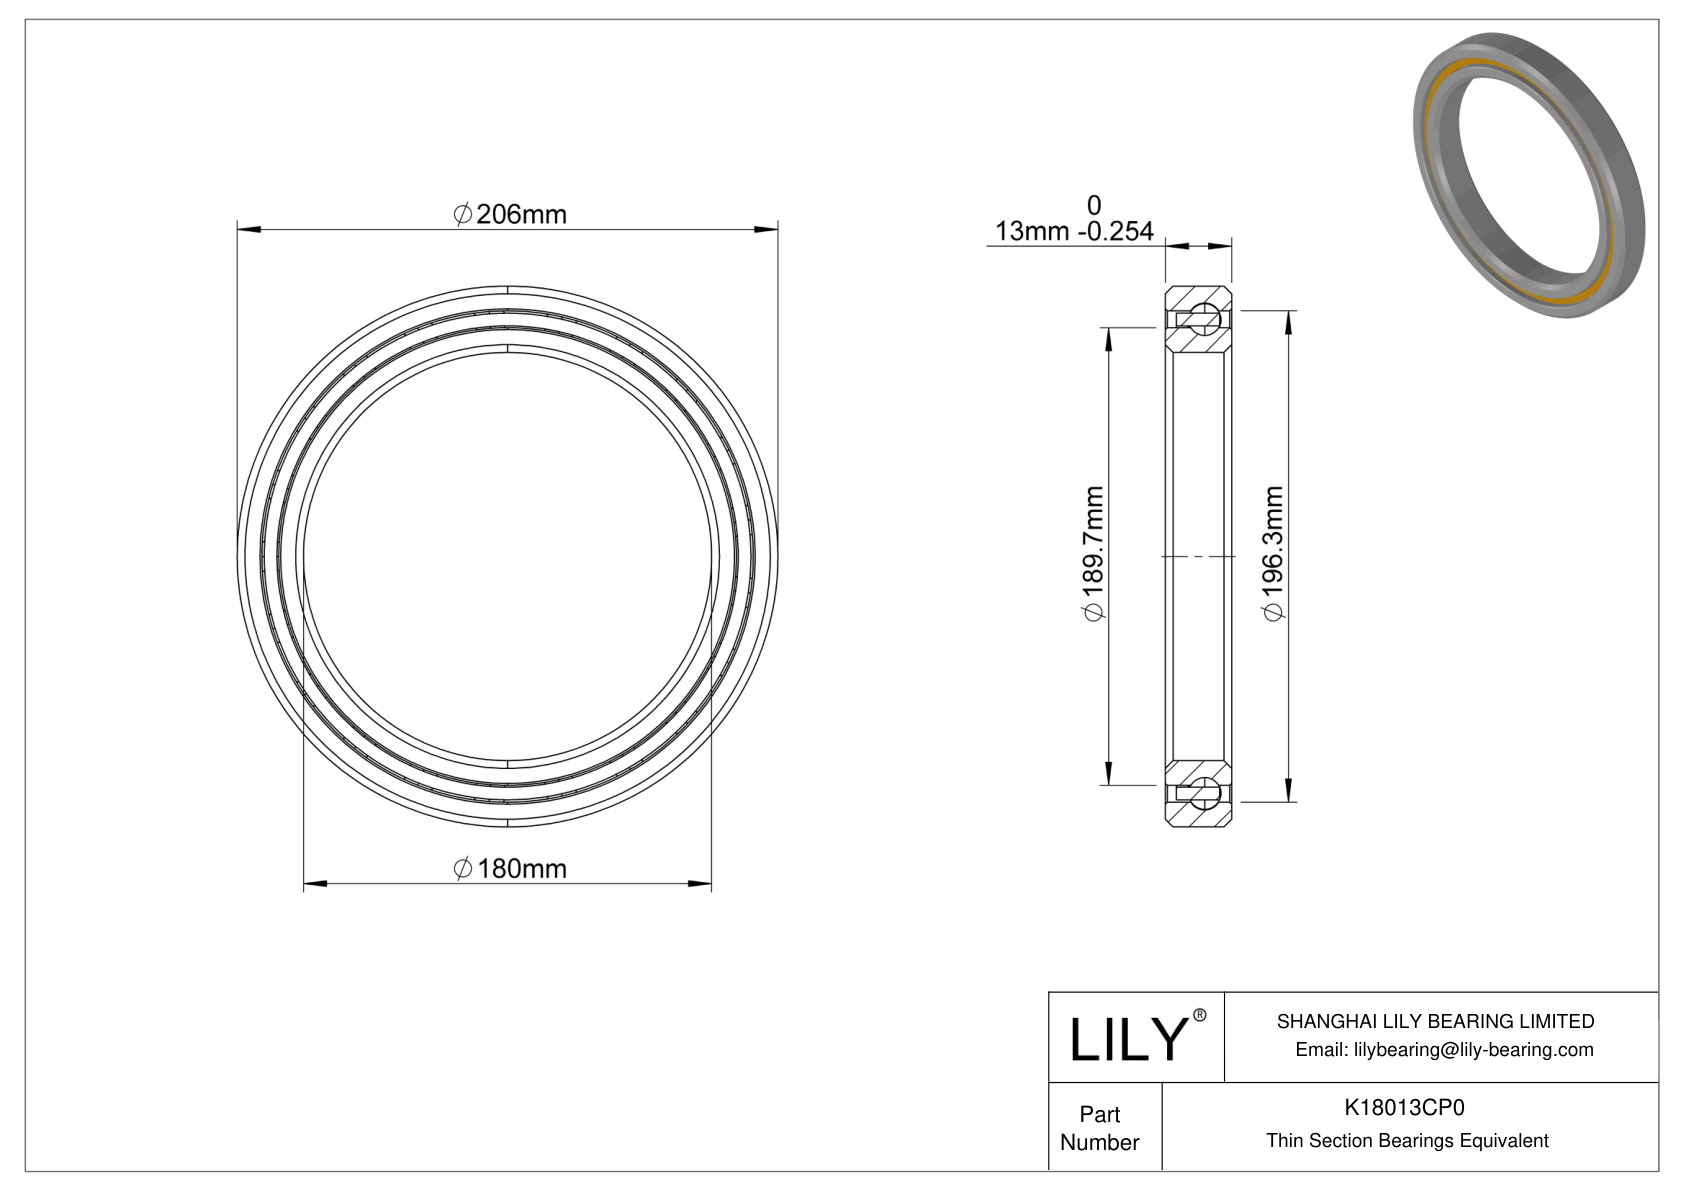 K18013CP0 Constant Section (CS) Bearings cad drawing